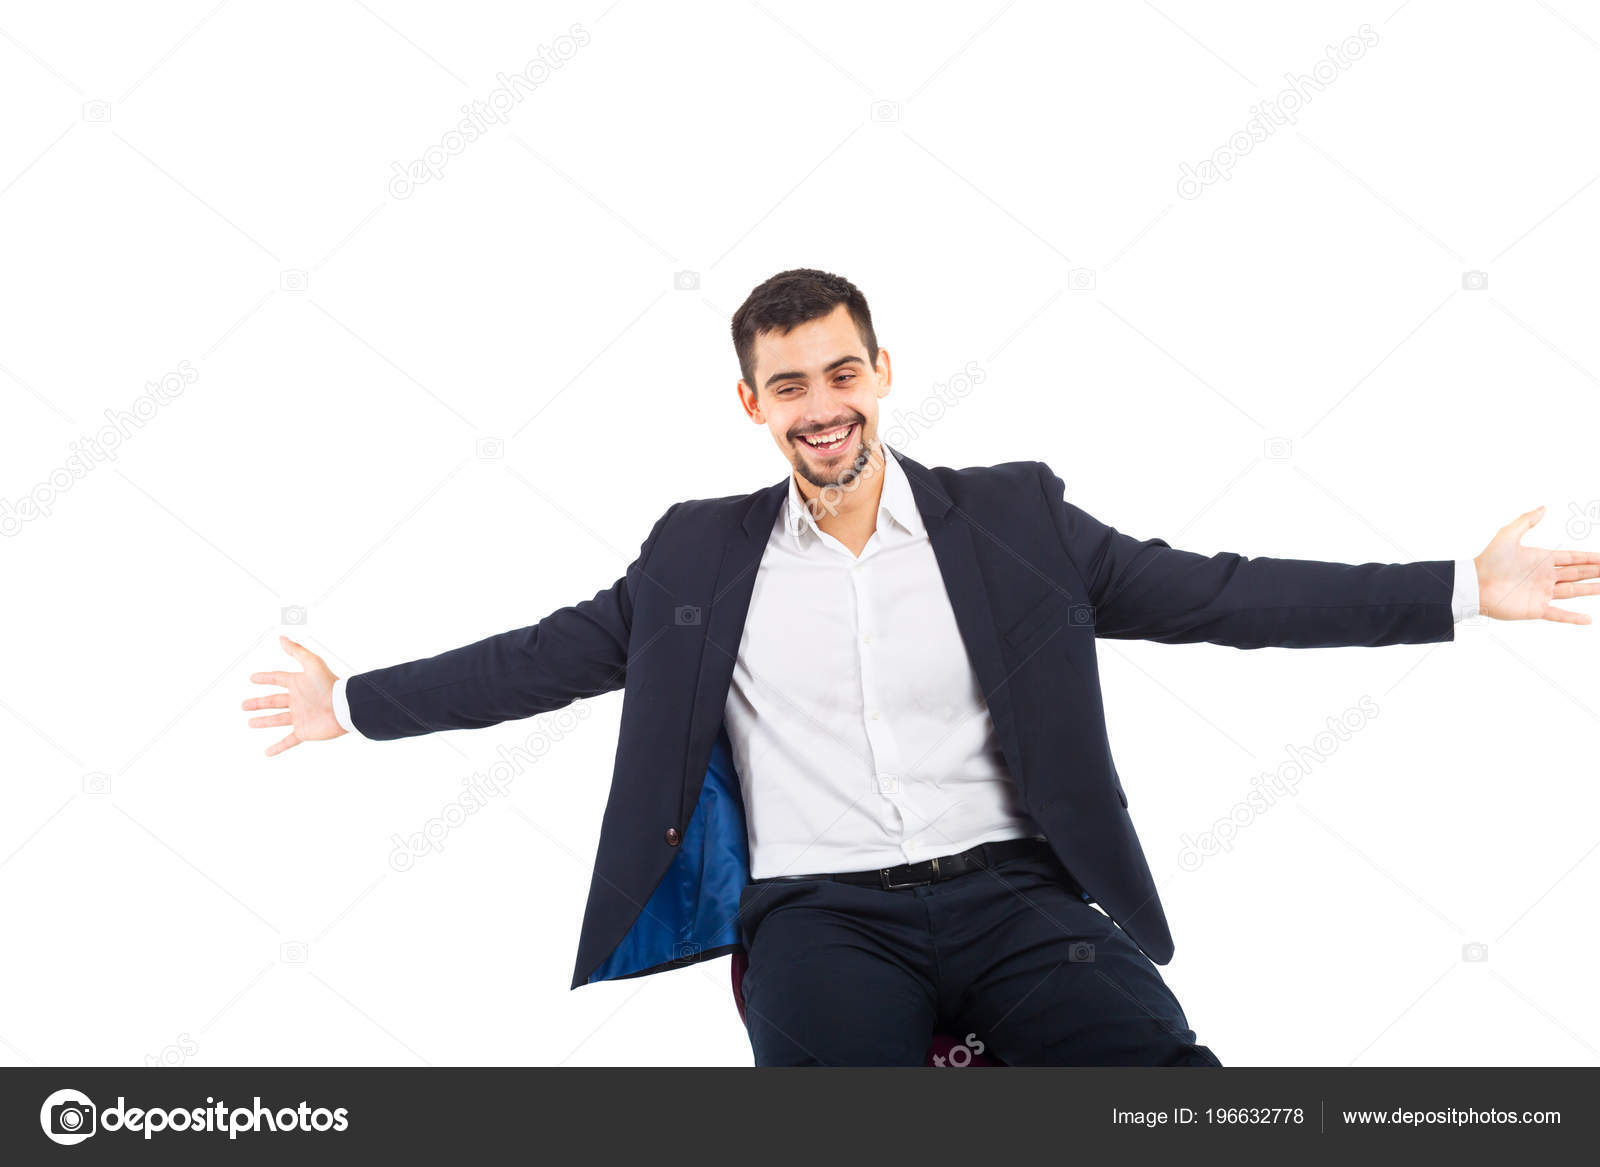 Enthusiastic Man smiling big arms stretched out in front palms up